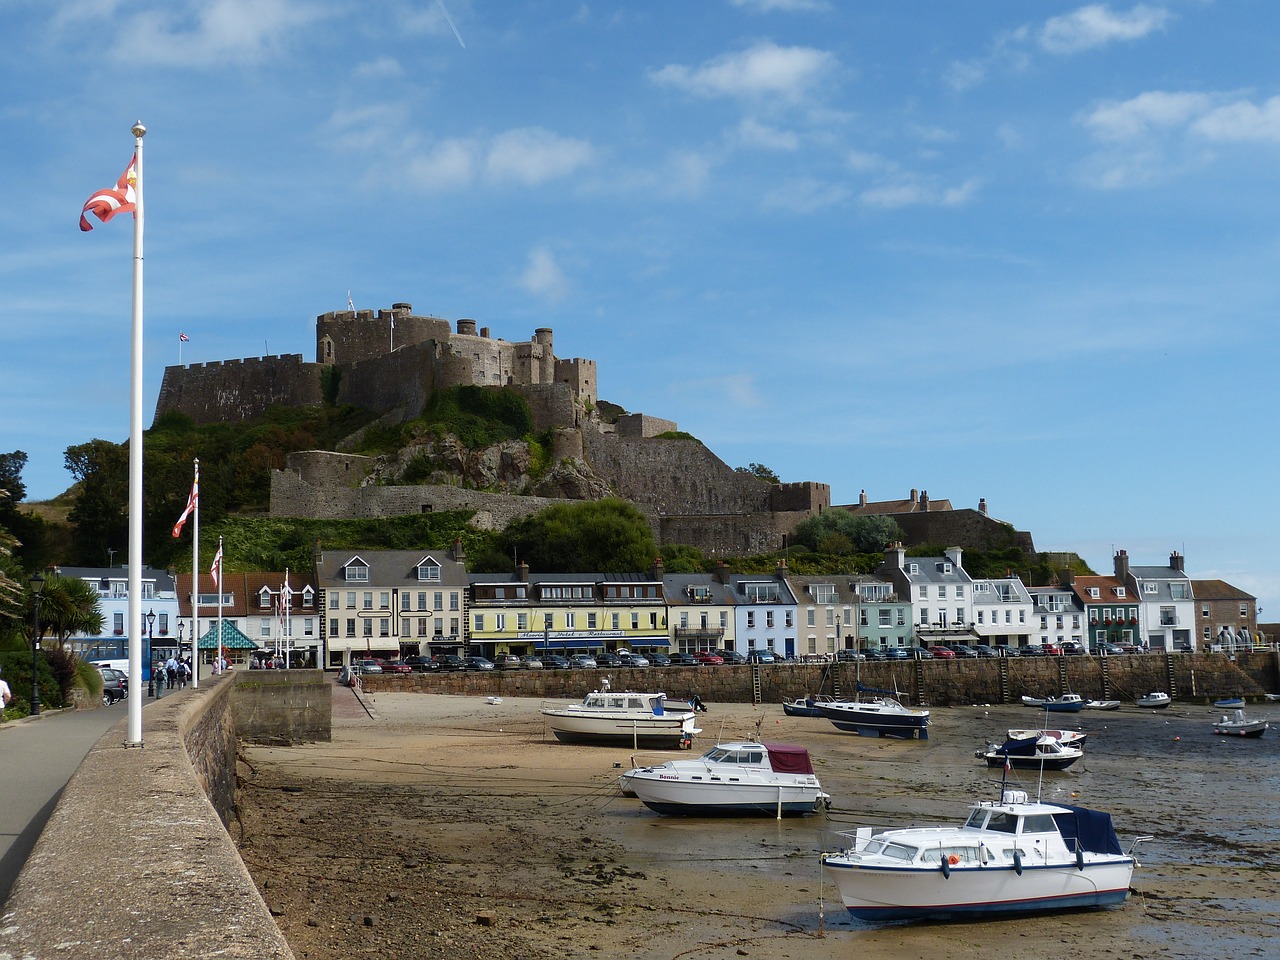 A stone castle sits atop a hill overlooking a harbour in Jersey